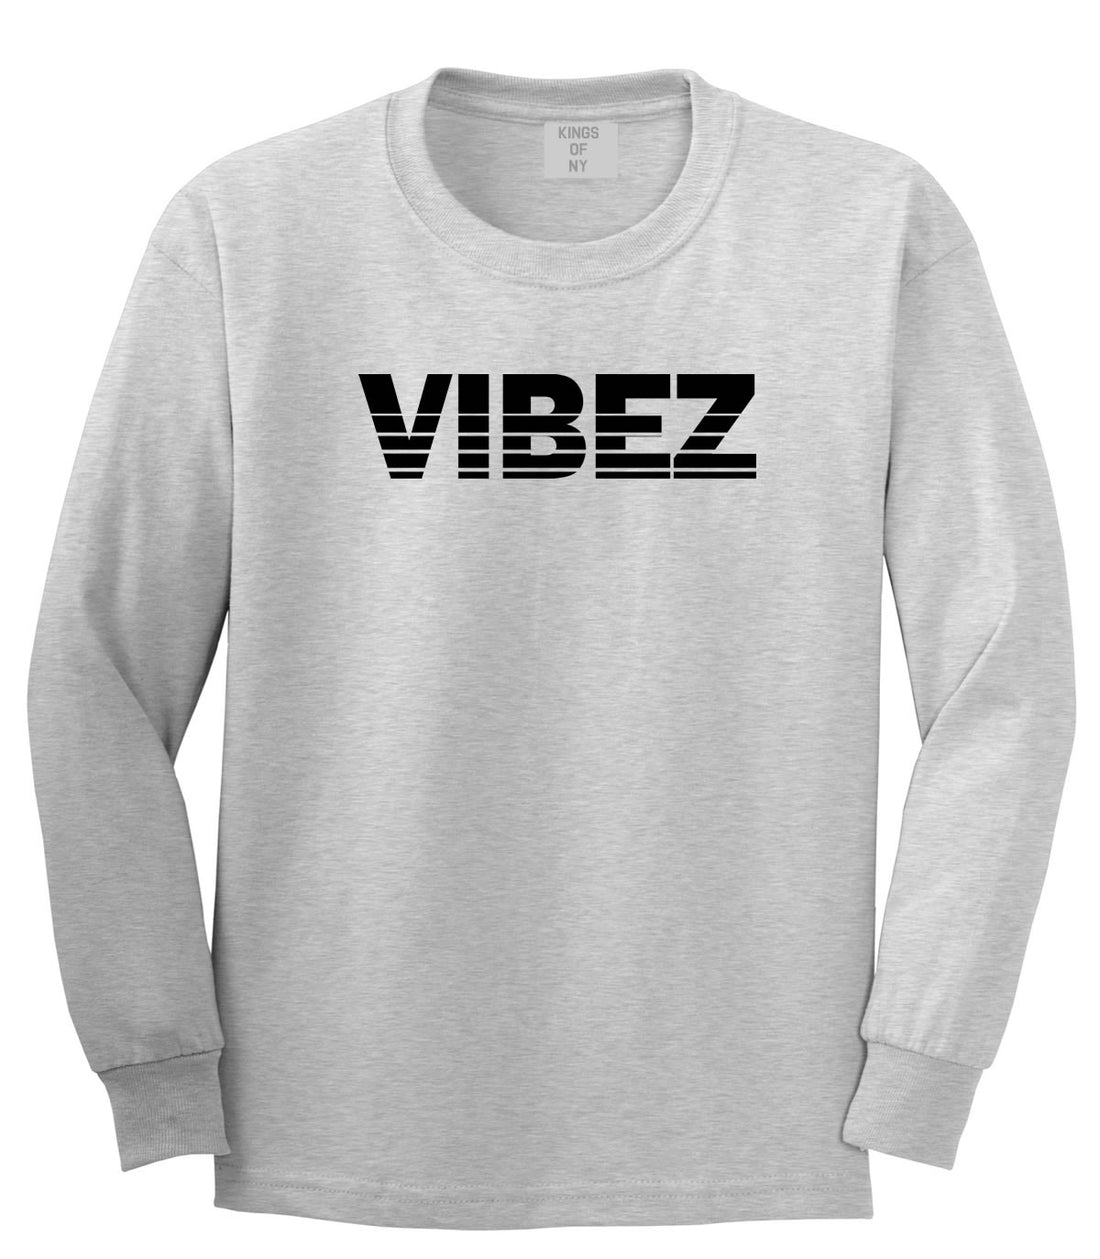 VIBEZ Racing Style Boys Kids Long Sleeve T-Shirt in Grey by Kings Of NY